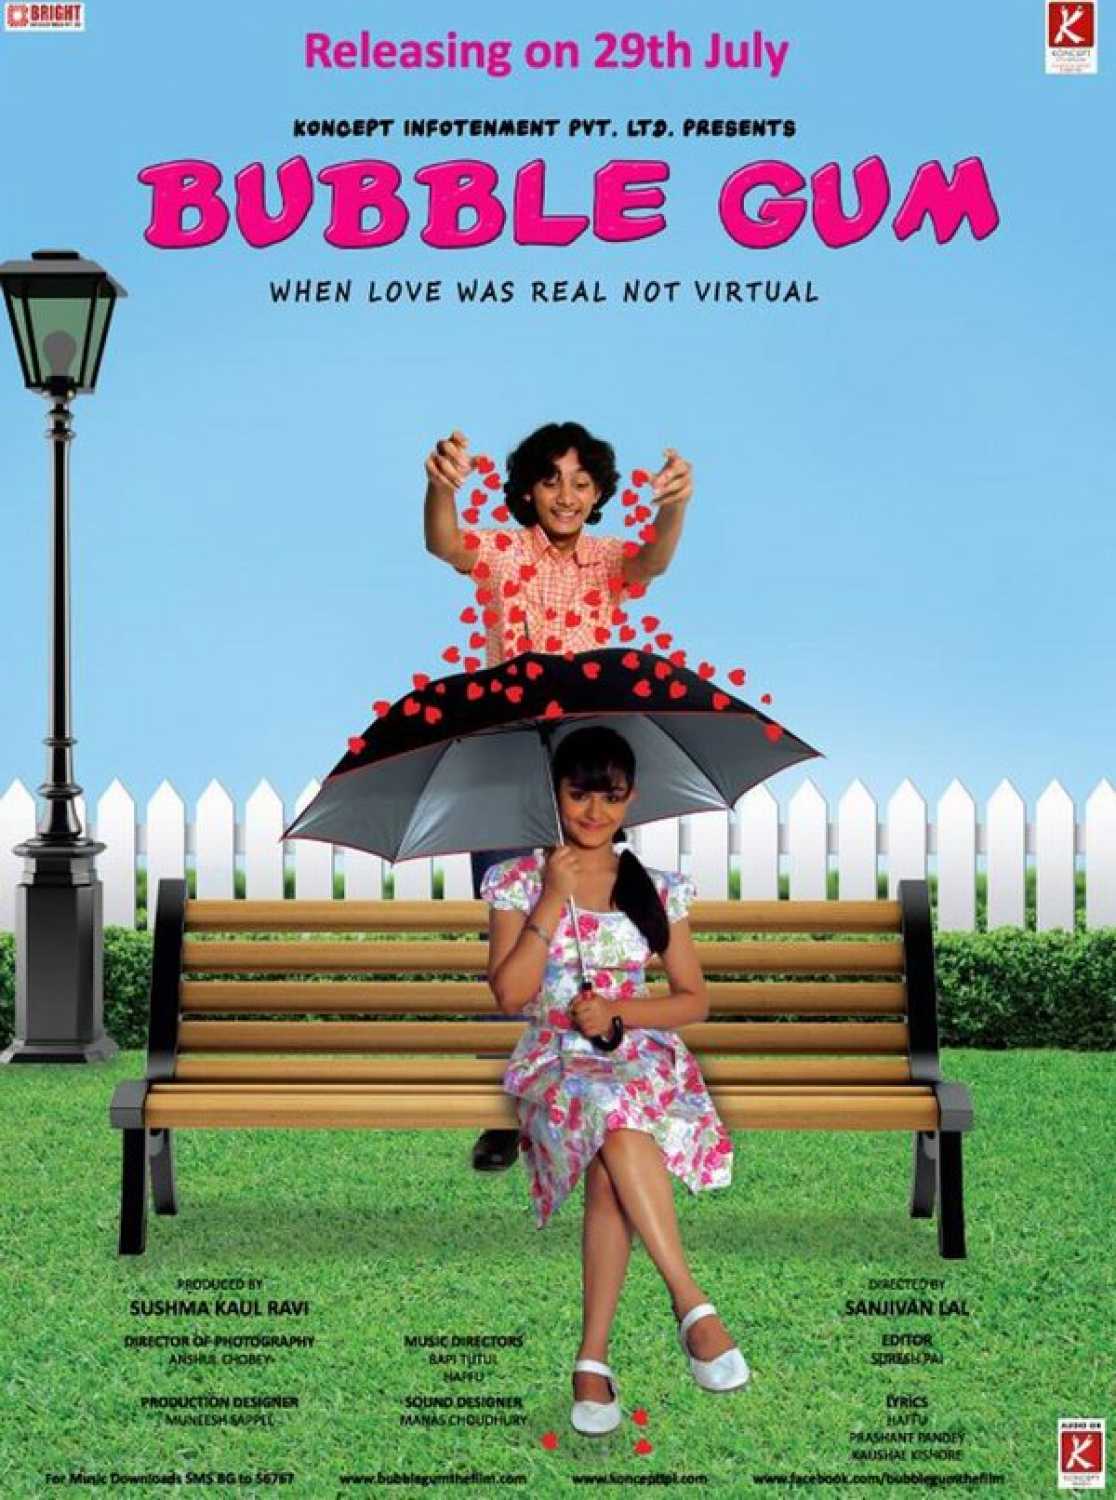 Poster for the movie "Bubble Gum"